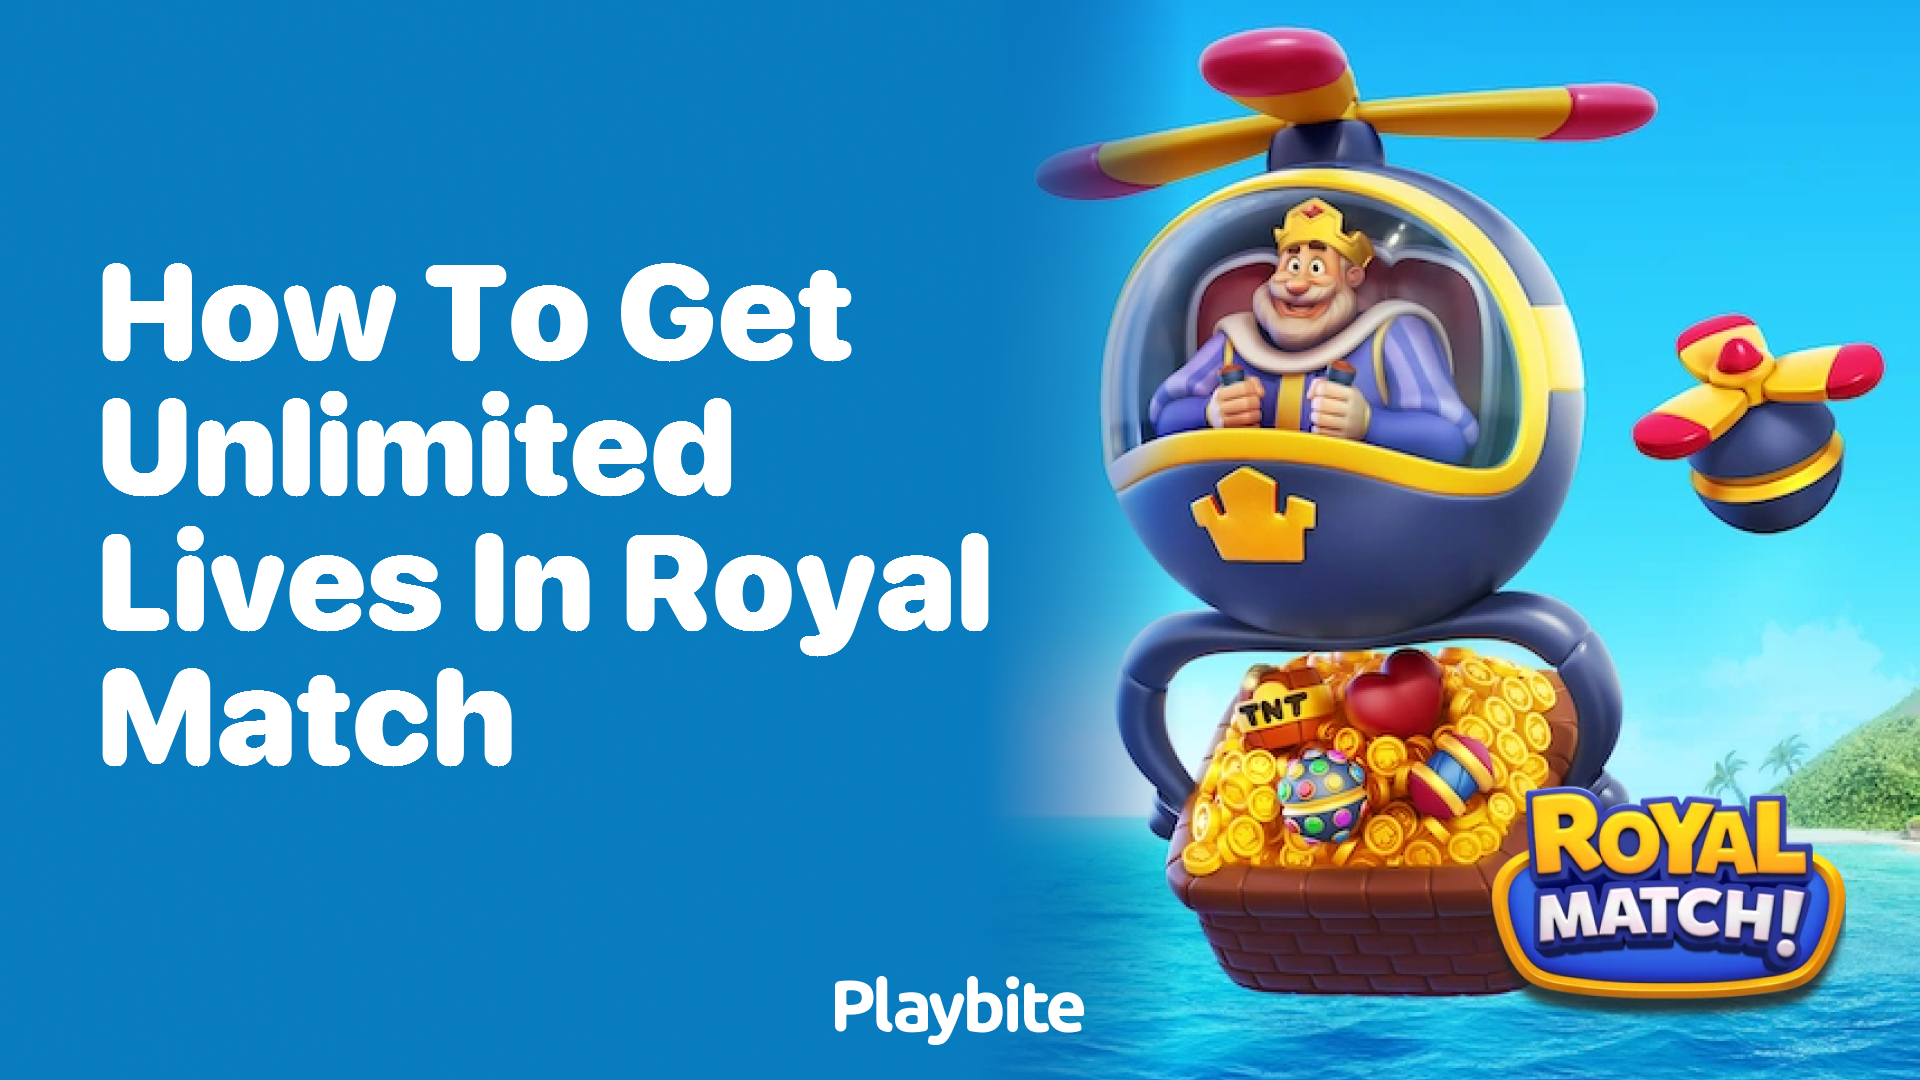 How to Get Unlimited Lives in Royal Match